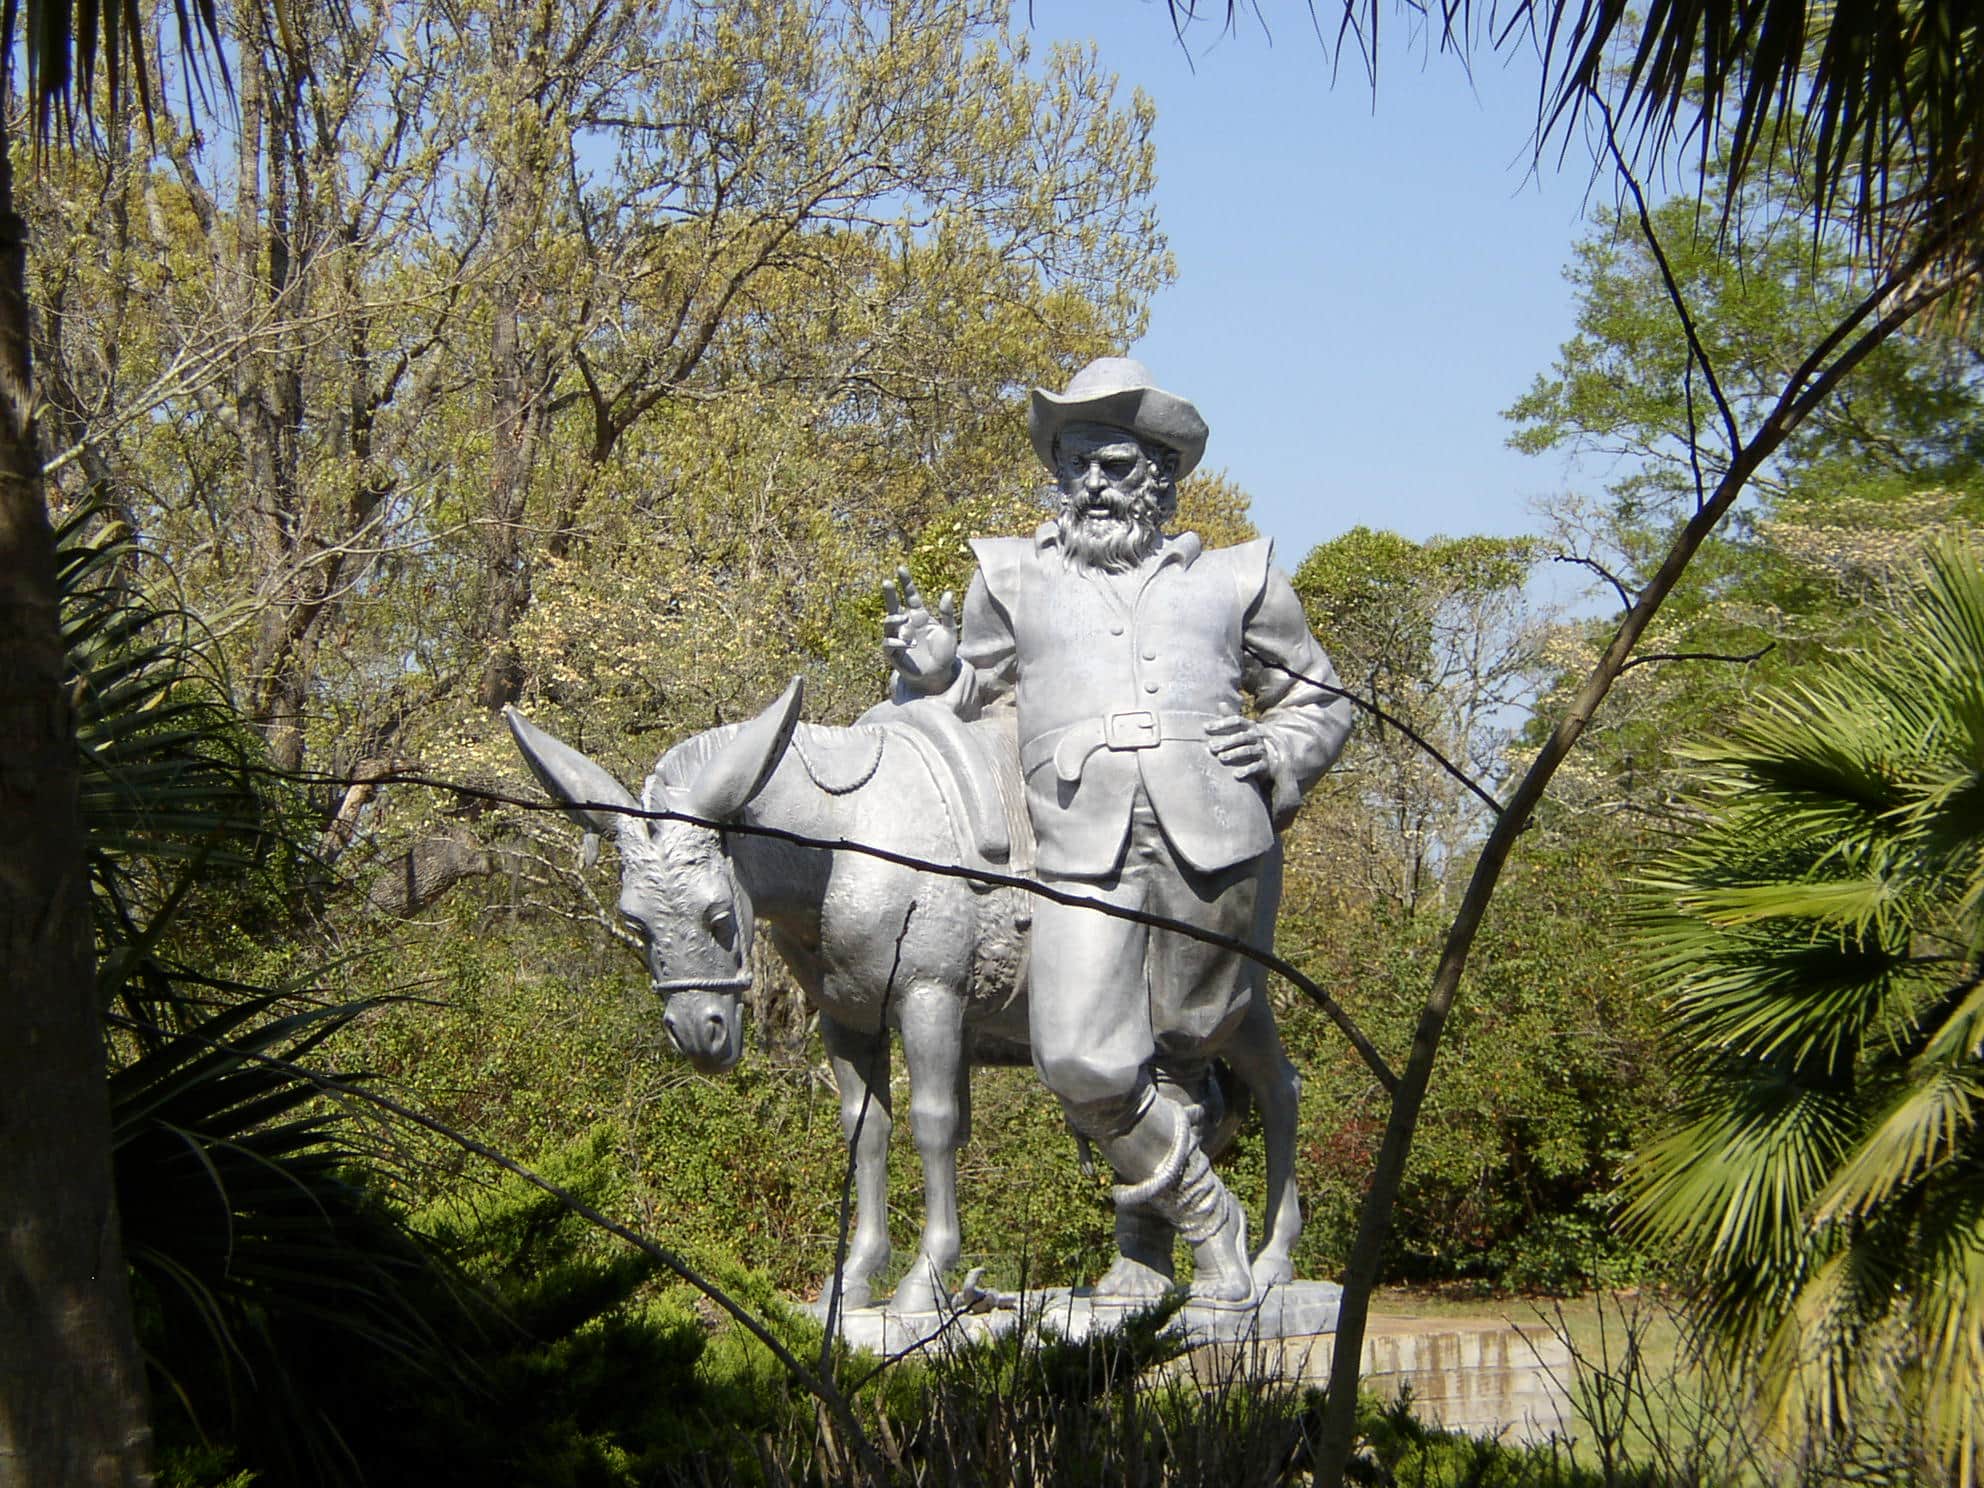 Donkey and Prospector statue